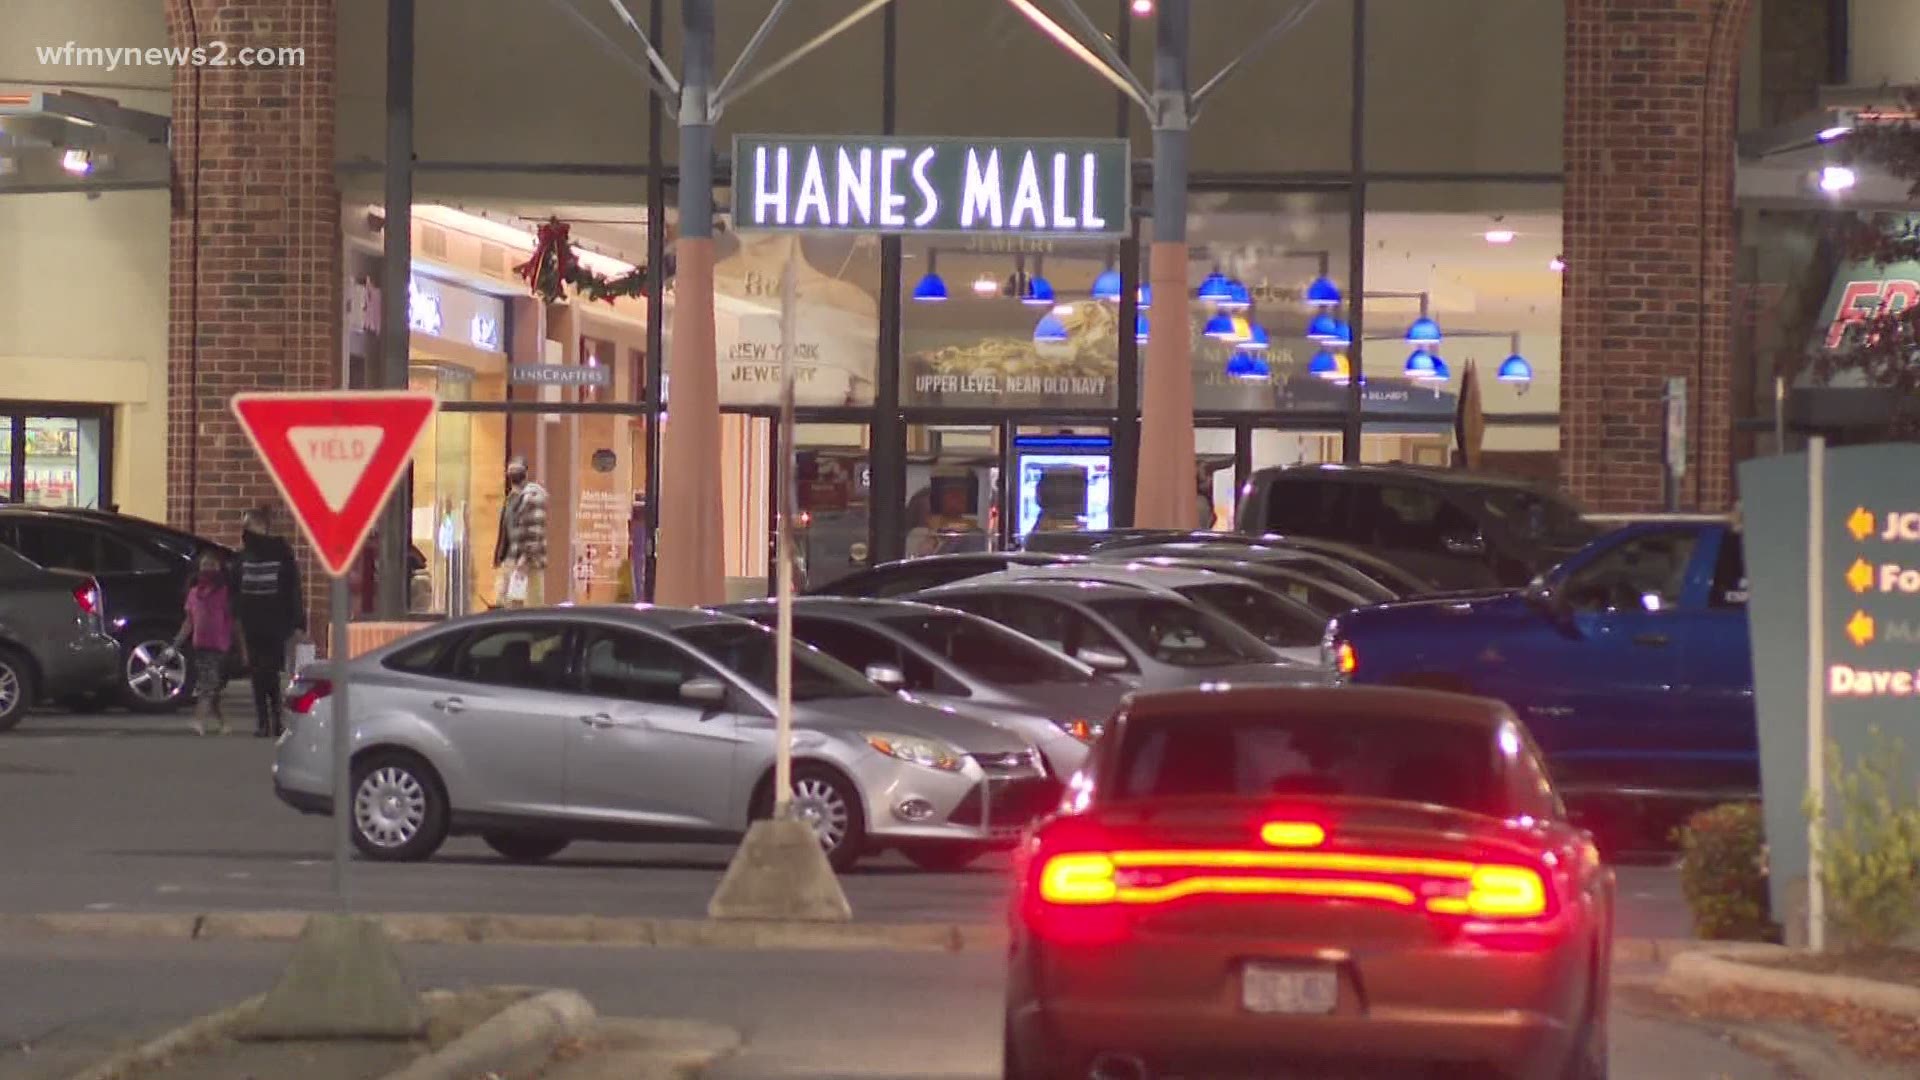 After police say a group of kids assaulted a woman, police say more officers will be at the mall during the holiday shopping season.